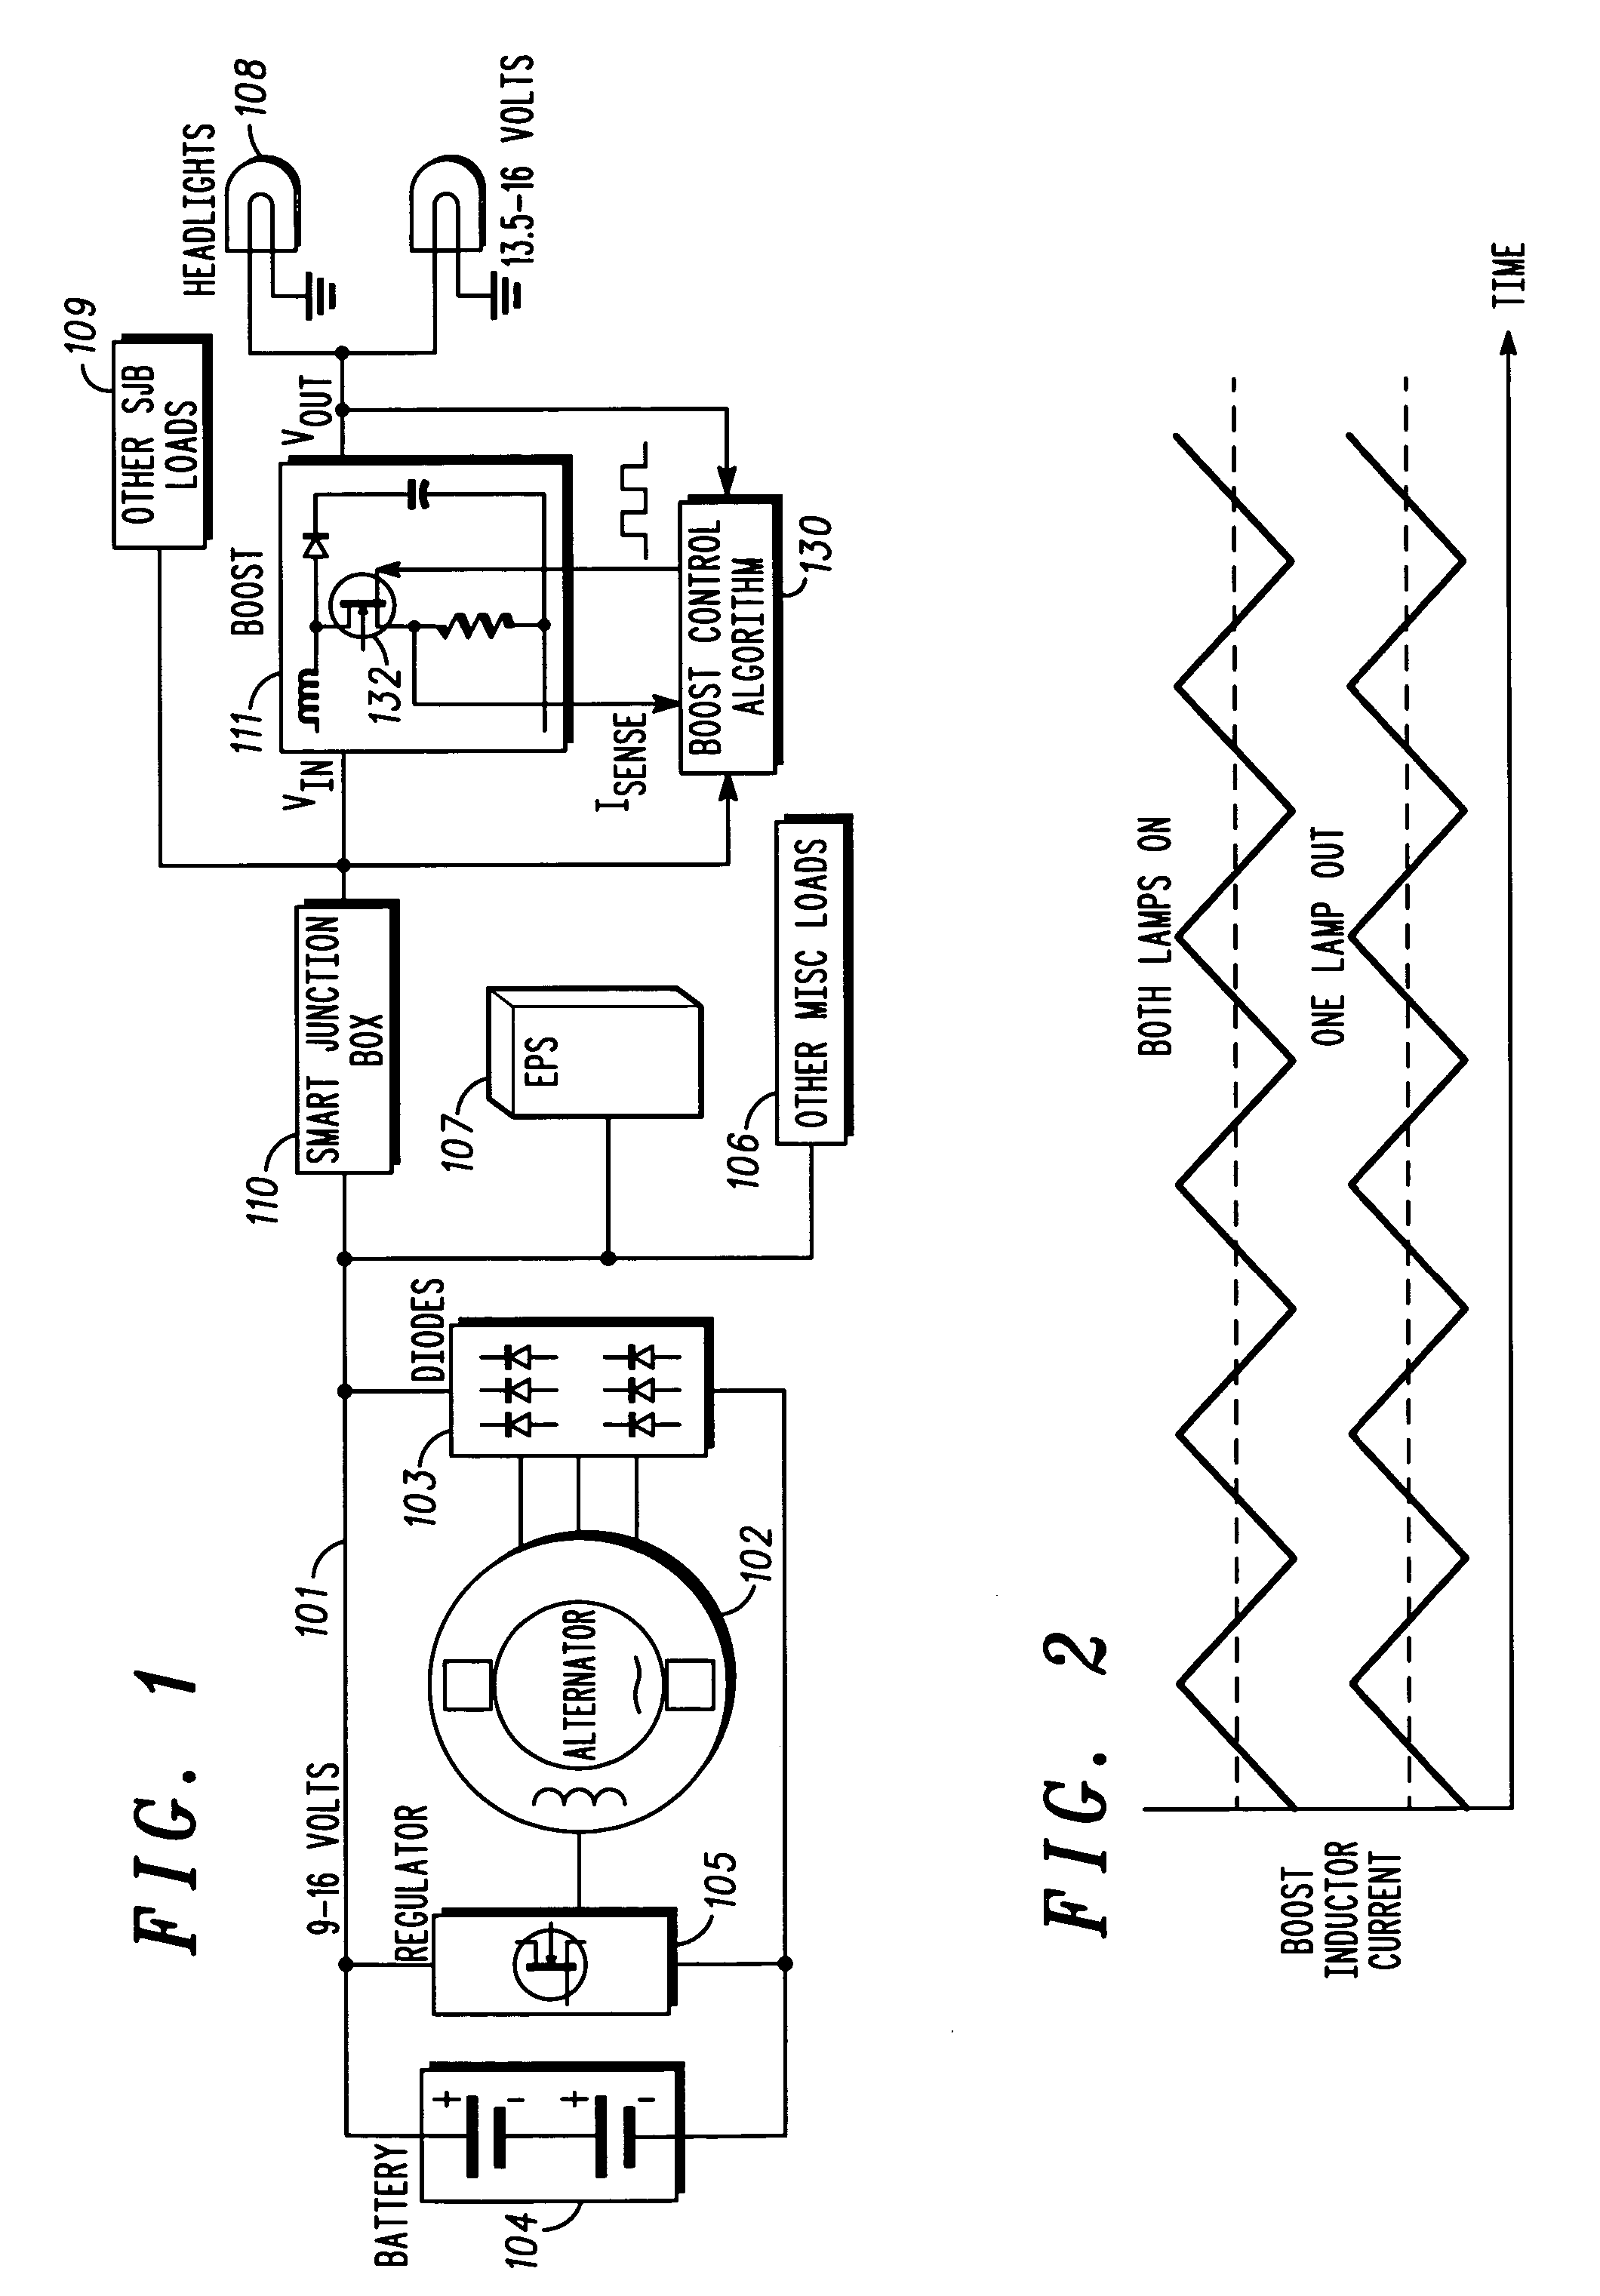 Automotive electrical system configuration using a two bus structure